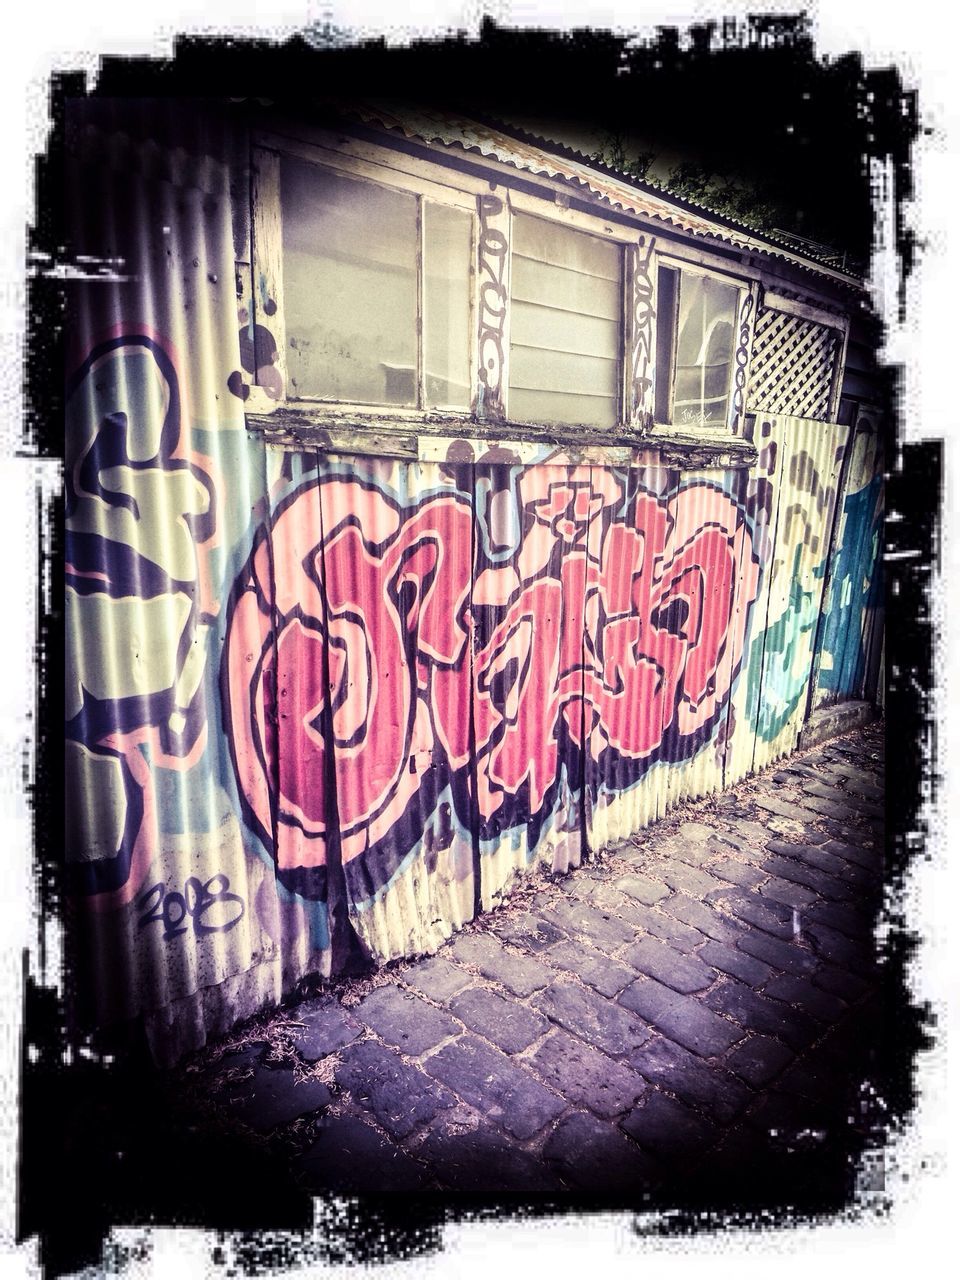 transfer print, graffiti, text, western script, auto post production filter, communication, art, creativity, wall - building feature, art and craft, built structure, building exterior, architecture, street art, vandalism, wall, capital letter, outdoors, day, no people